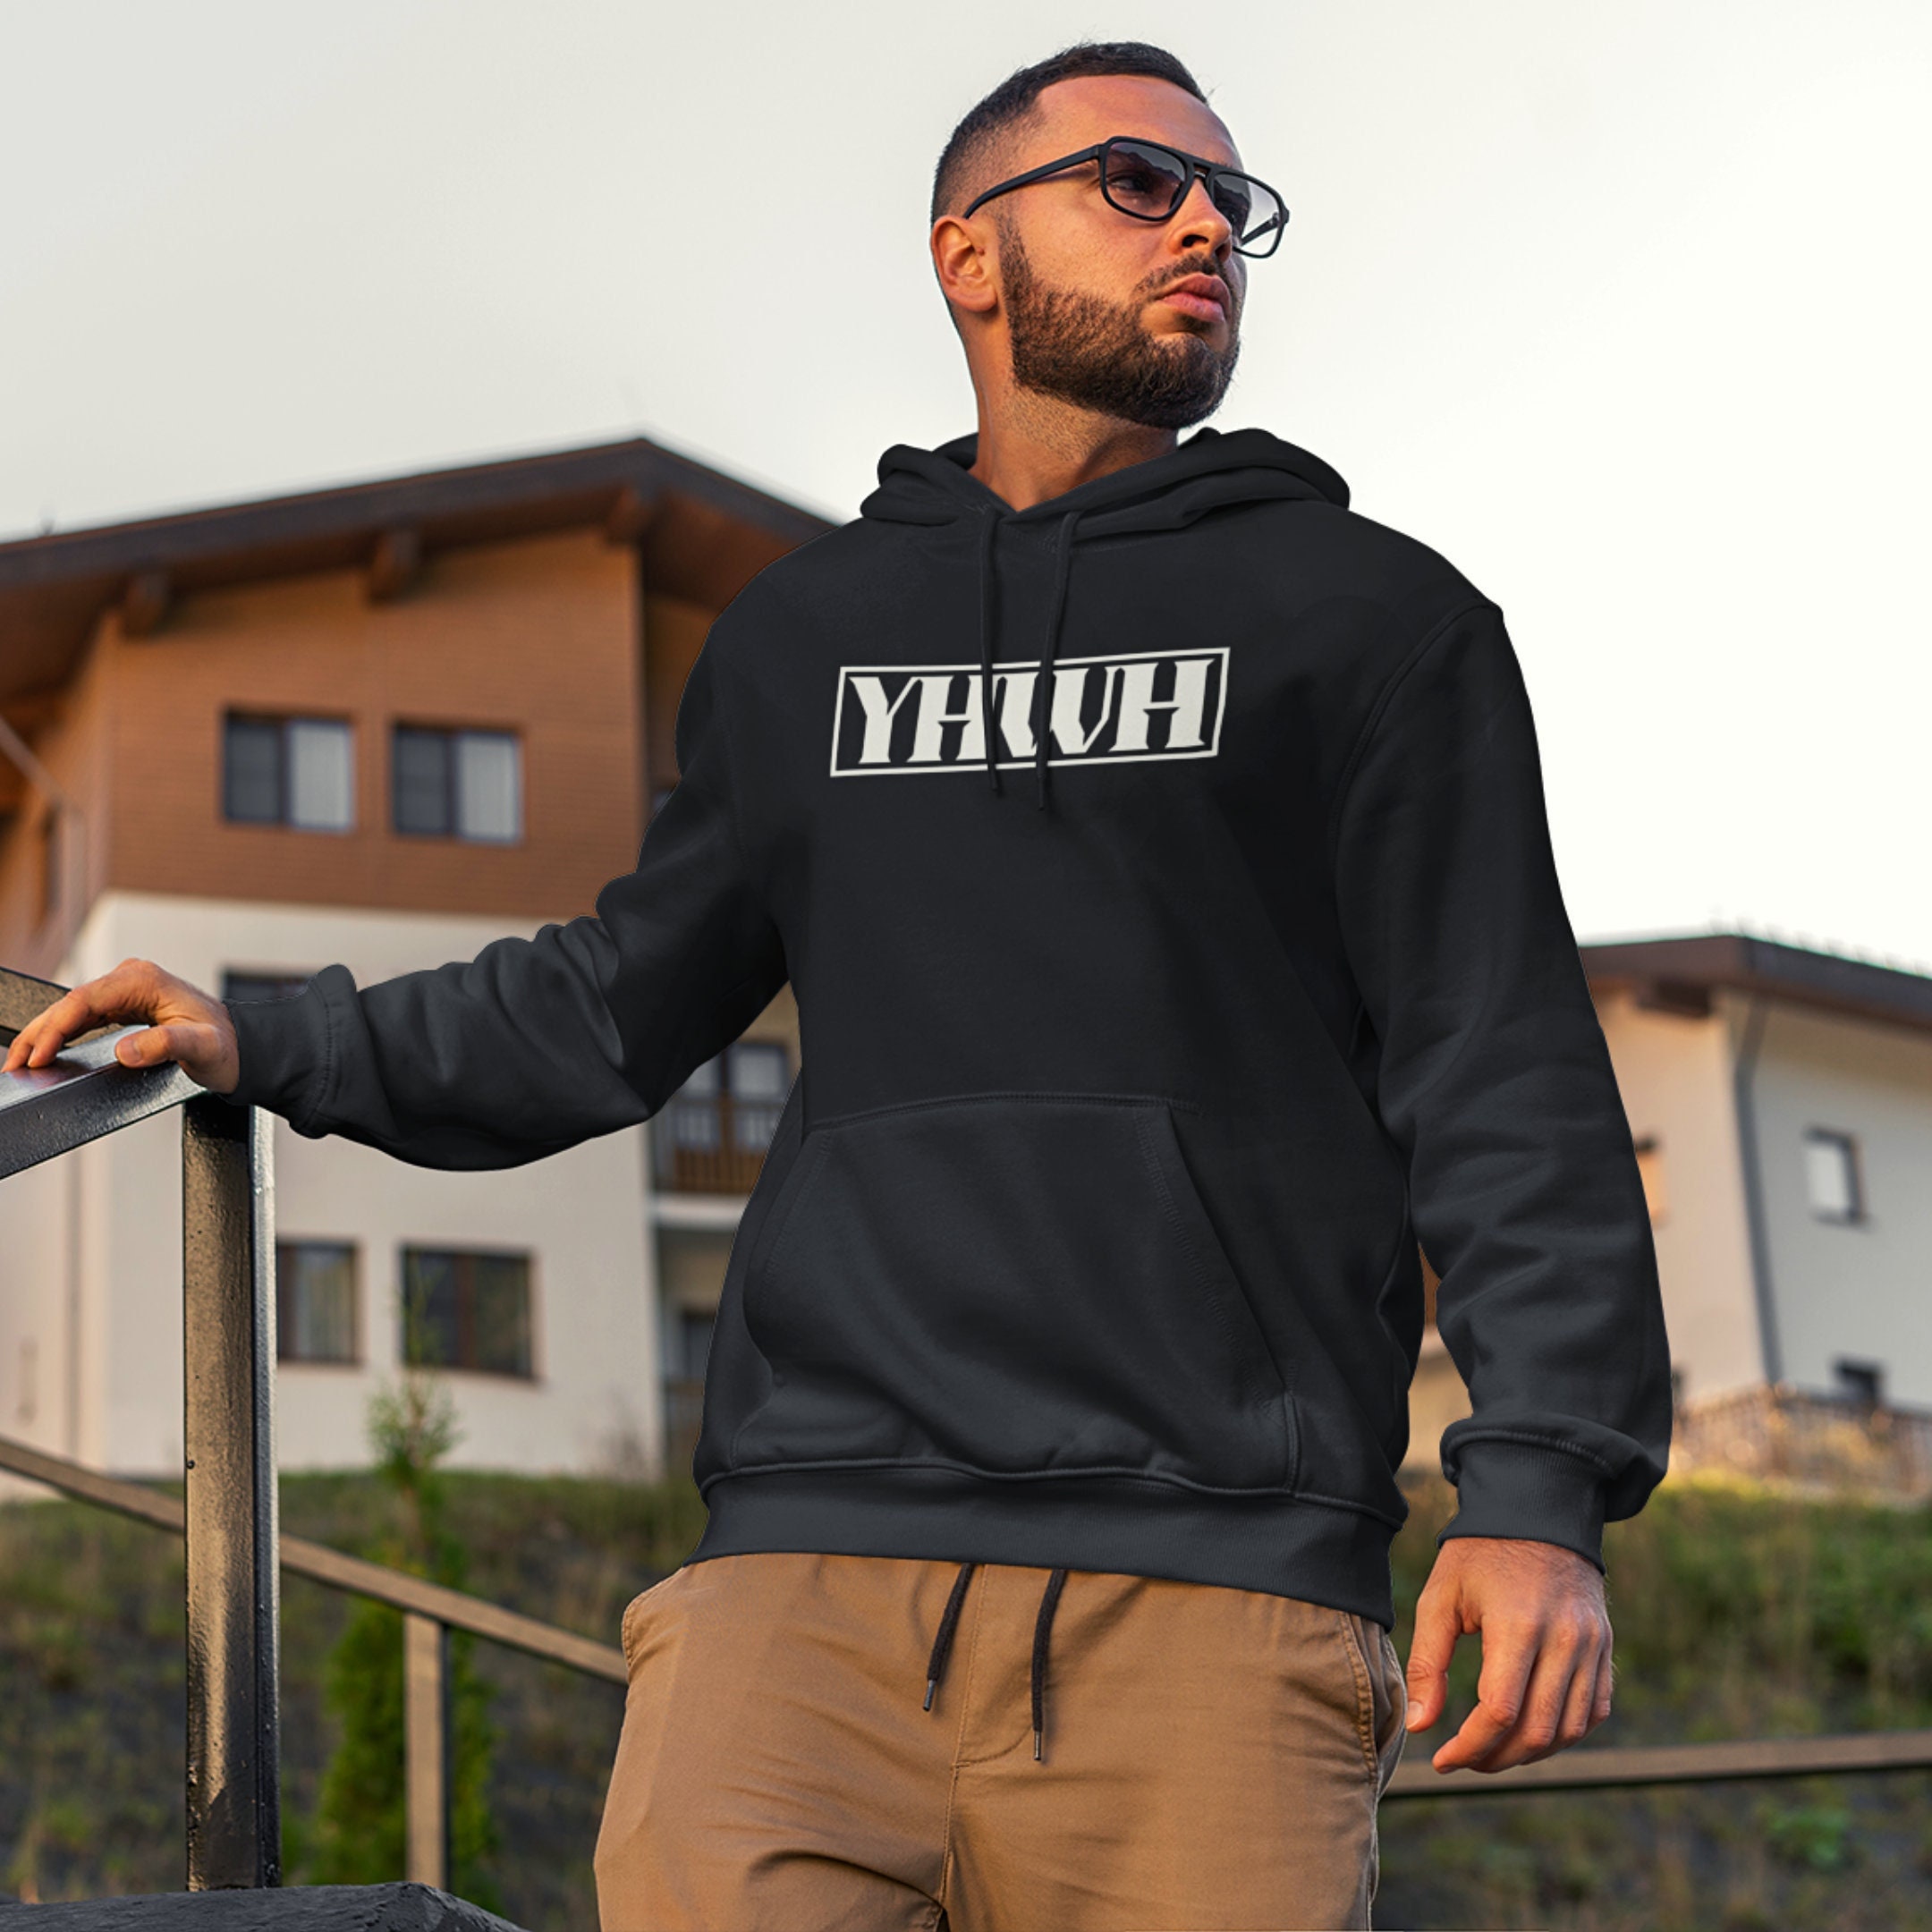 Incarijk Infecteren Beven YHWH Black Christian Pullover Hoodie Name of God Yahweh Comfy - Etsy